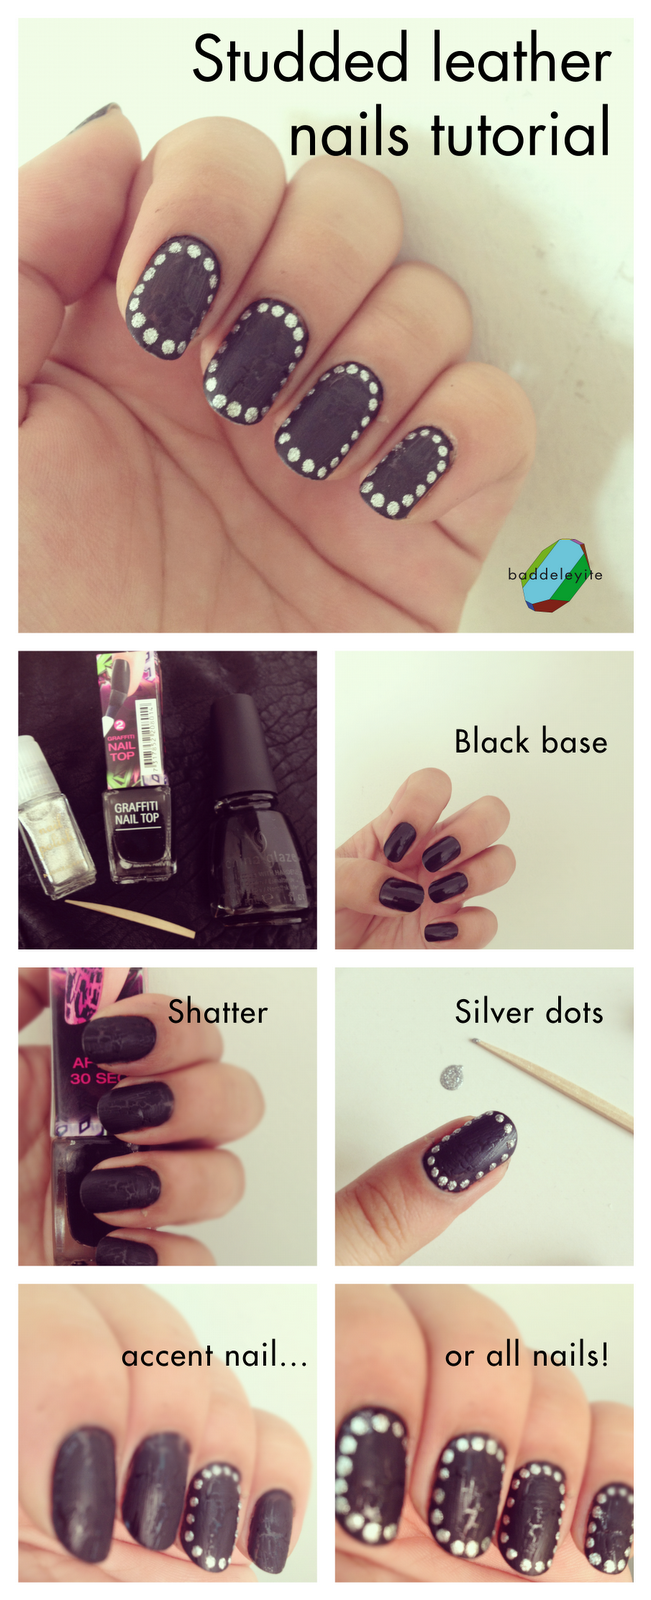 $2 Drugstore Nail Polish Beats $27 Chanel Brand in Quality Test